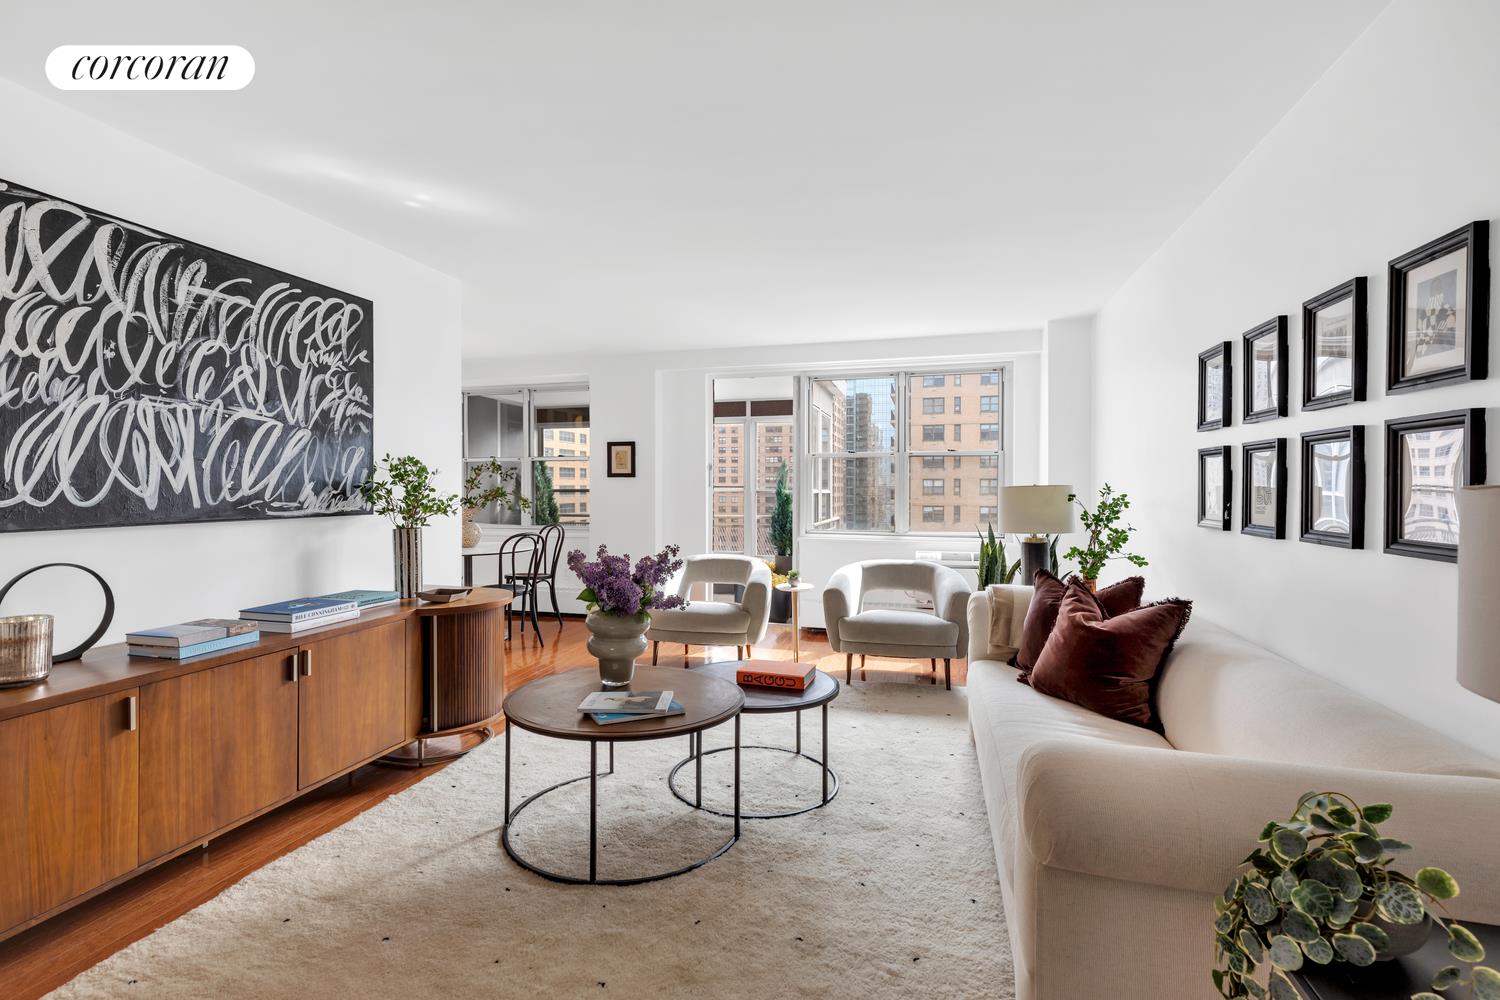 303 West 66th Street 20Ge, Lincoln Sq, Upper West Side, NYC - 2 Bedrooms  
1 Bathrooms  
4 Rooms - 